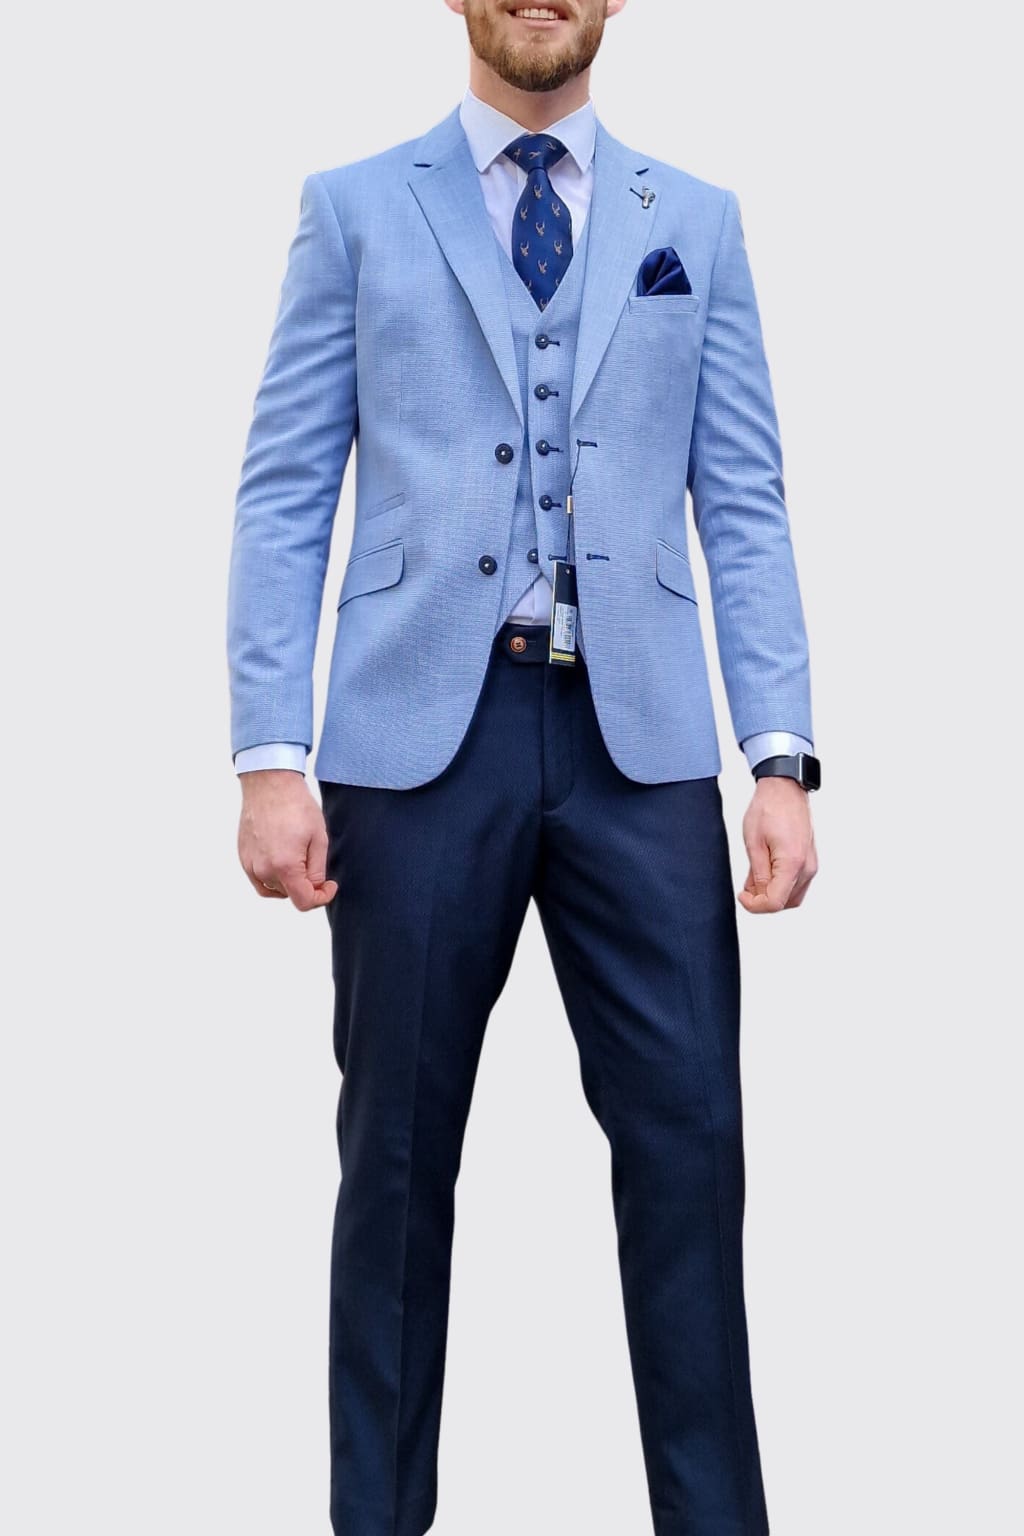 Buy Sky Blue Suit Online In India  Etsy India